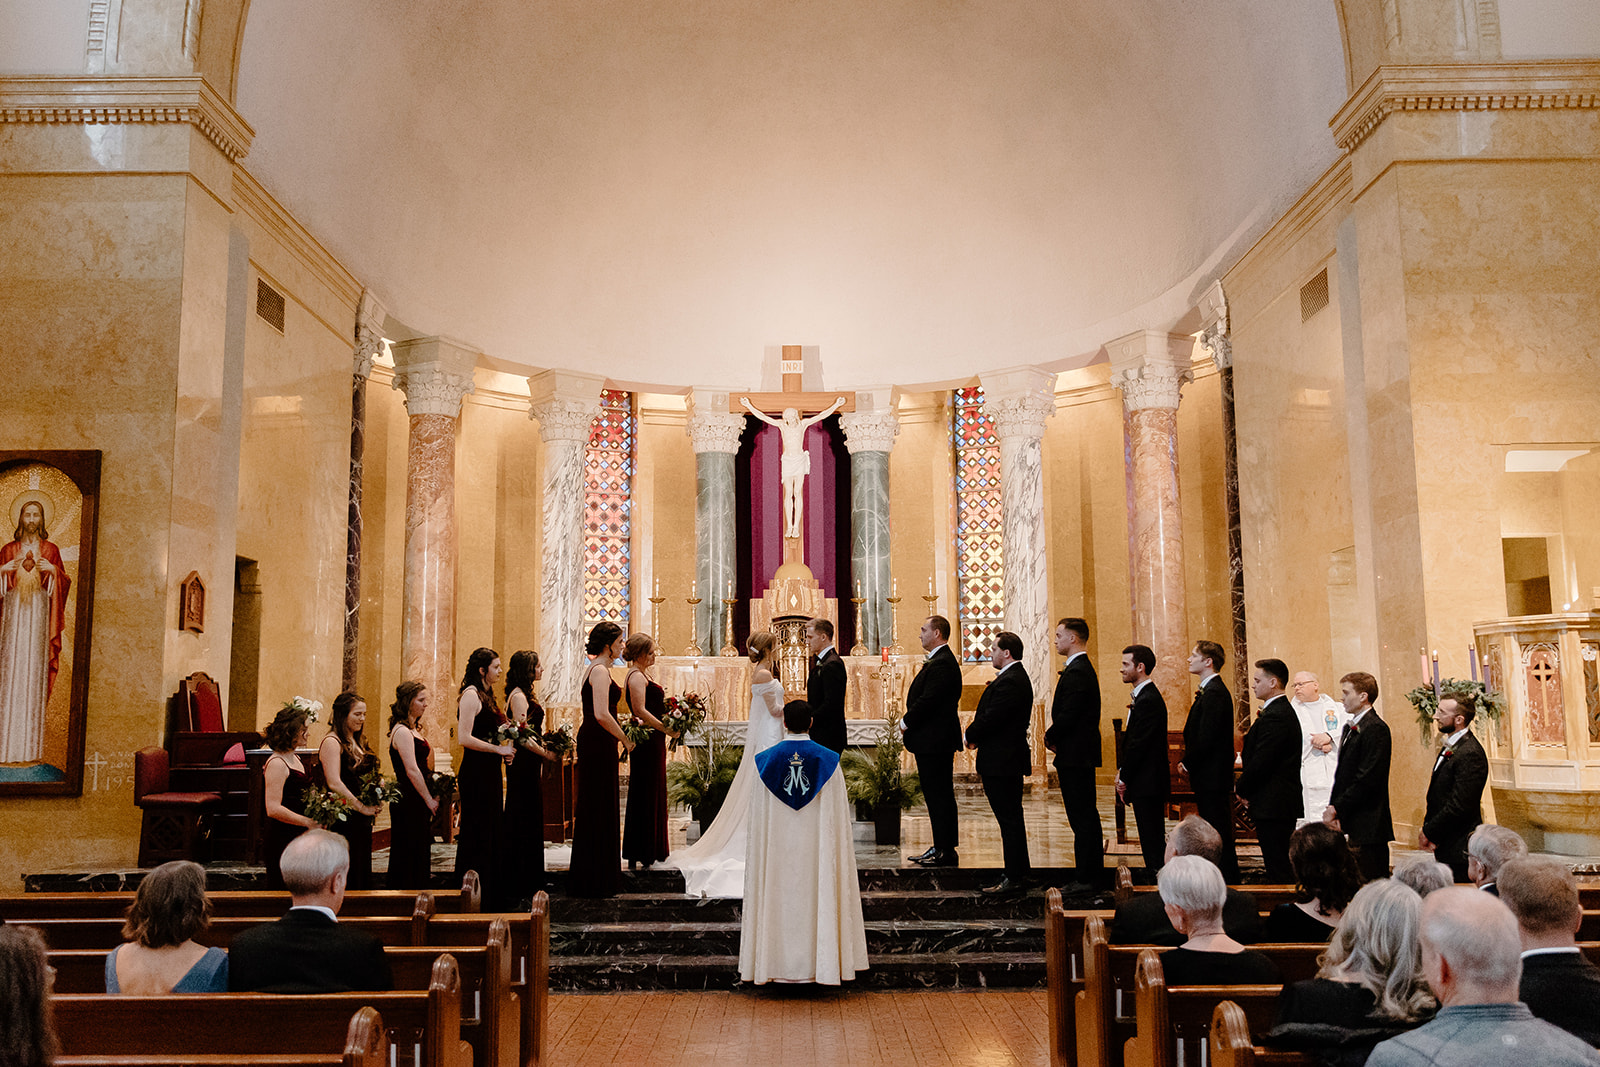 Bride and groom with their wedding party standing at the front of a church